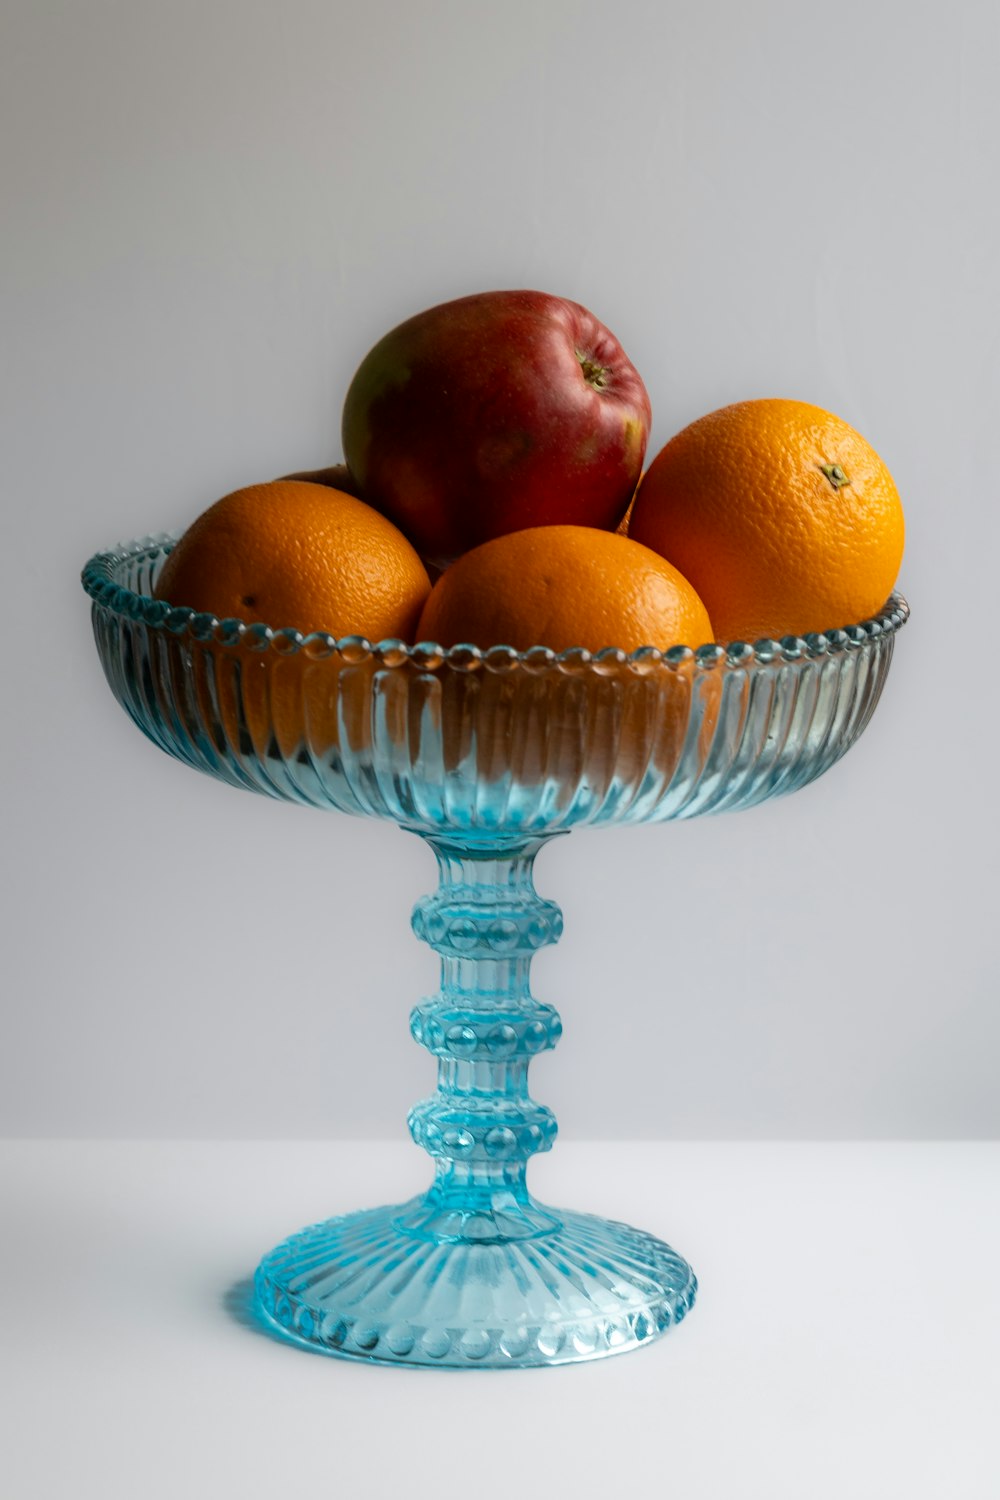 a glass bowl filled with oranges and apples